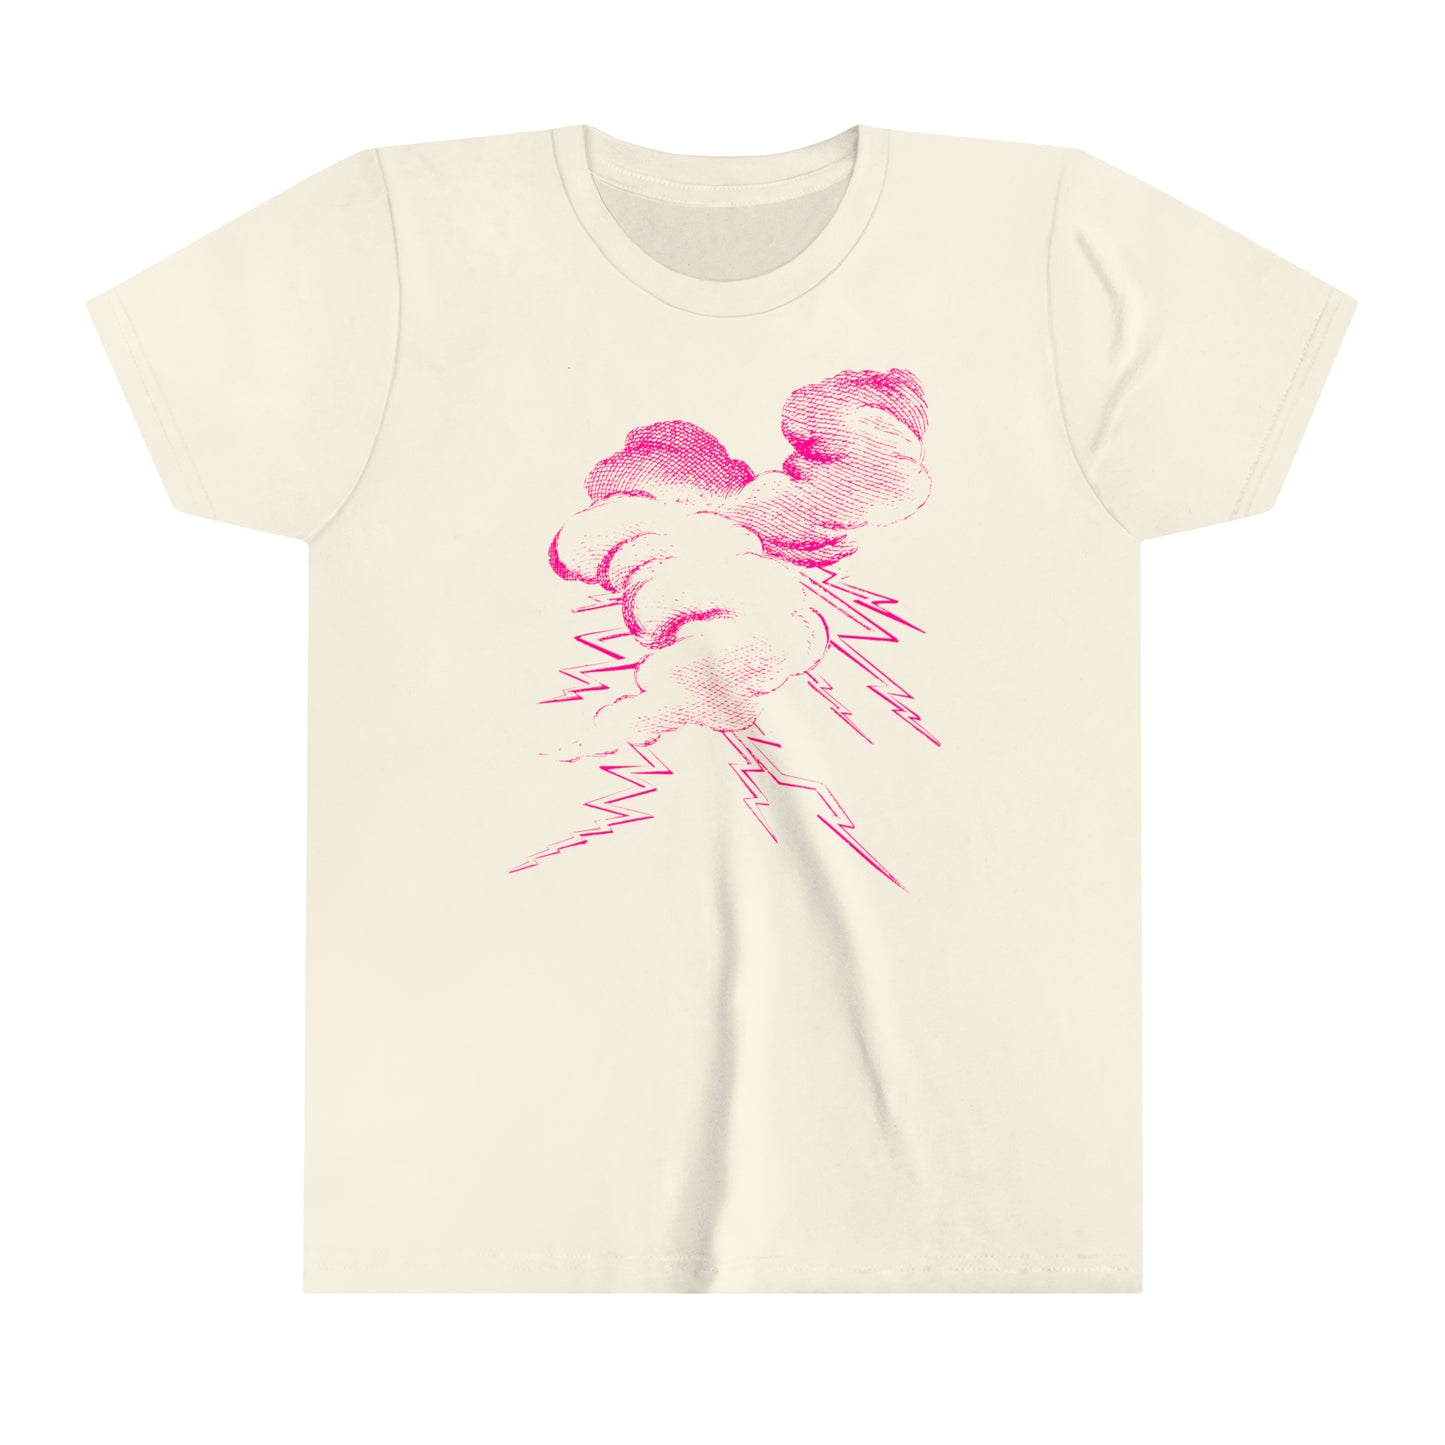 Large Charge in Lectric Pink Front Print in Soft, Lightweight Cotton Kids Tee